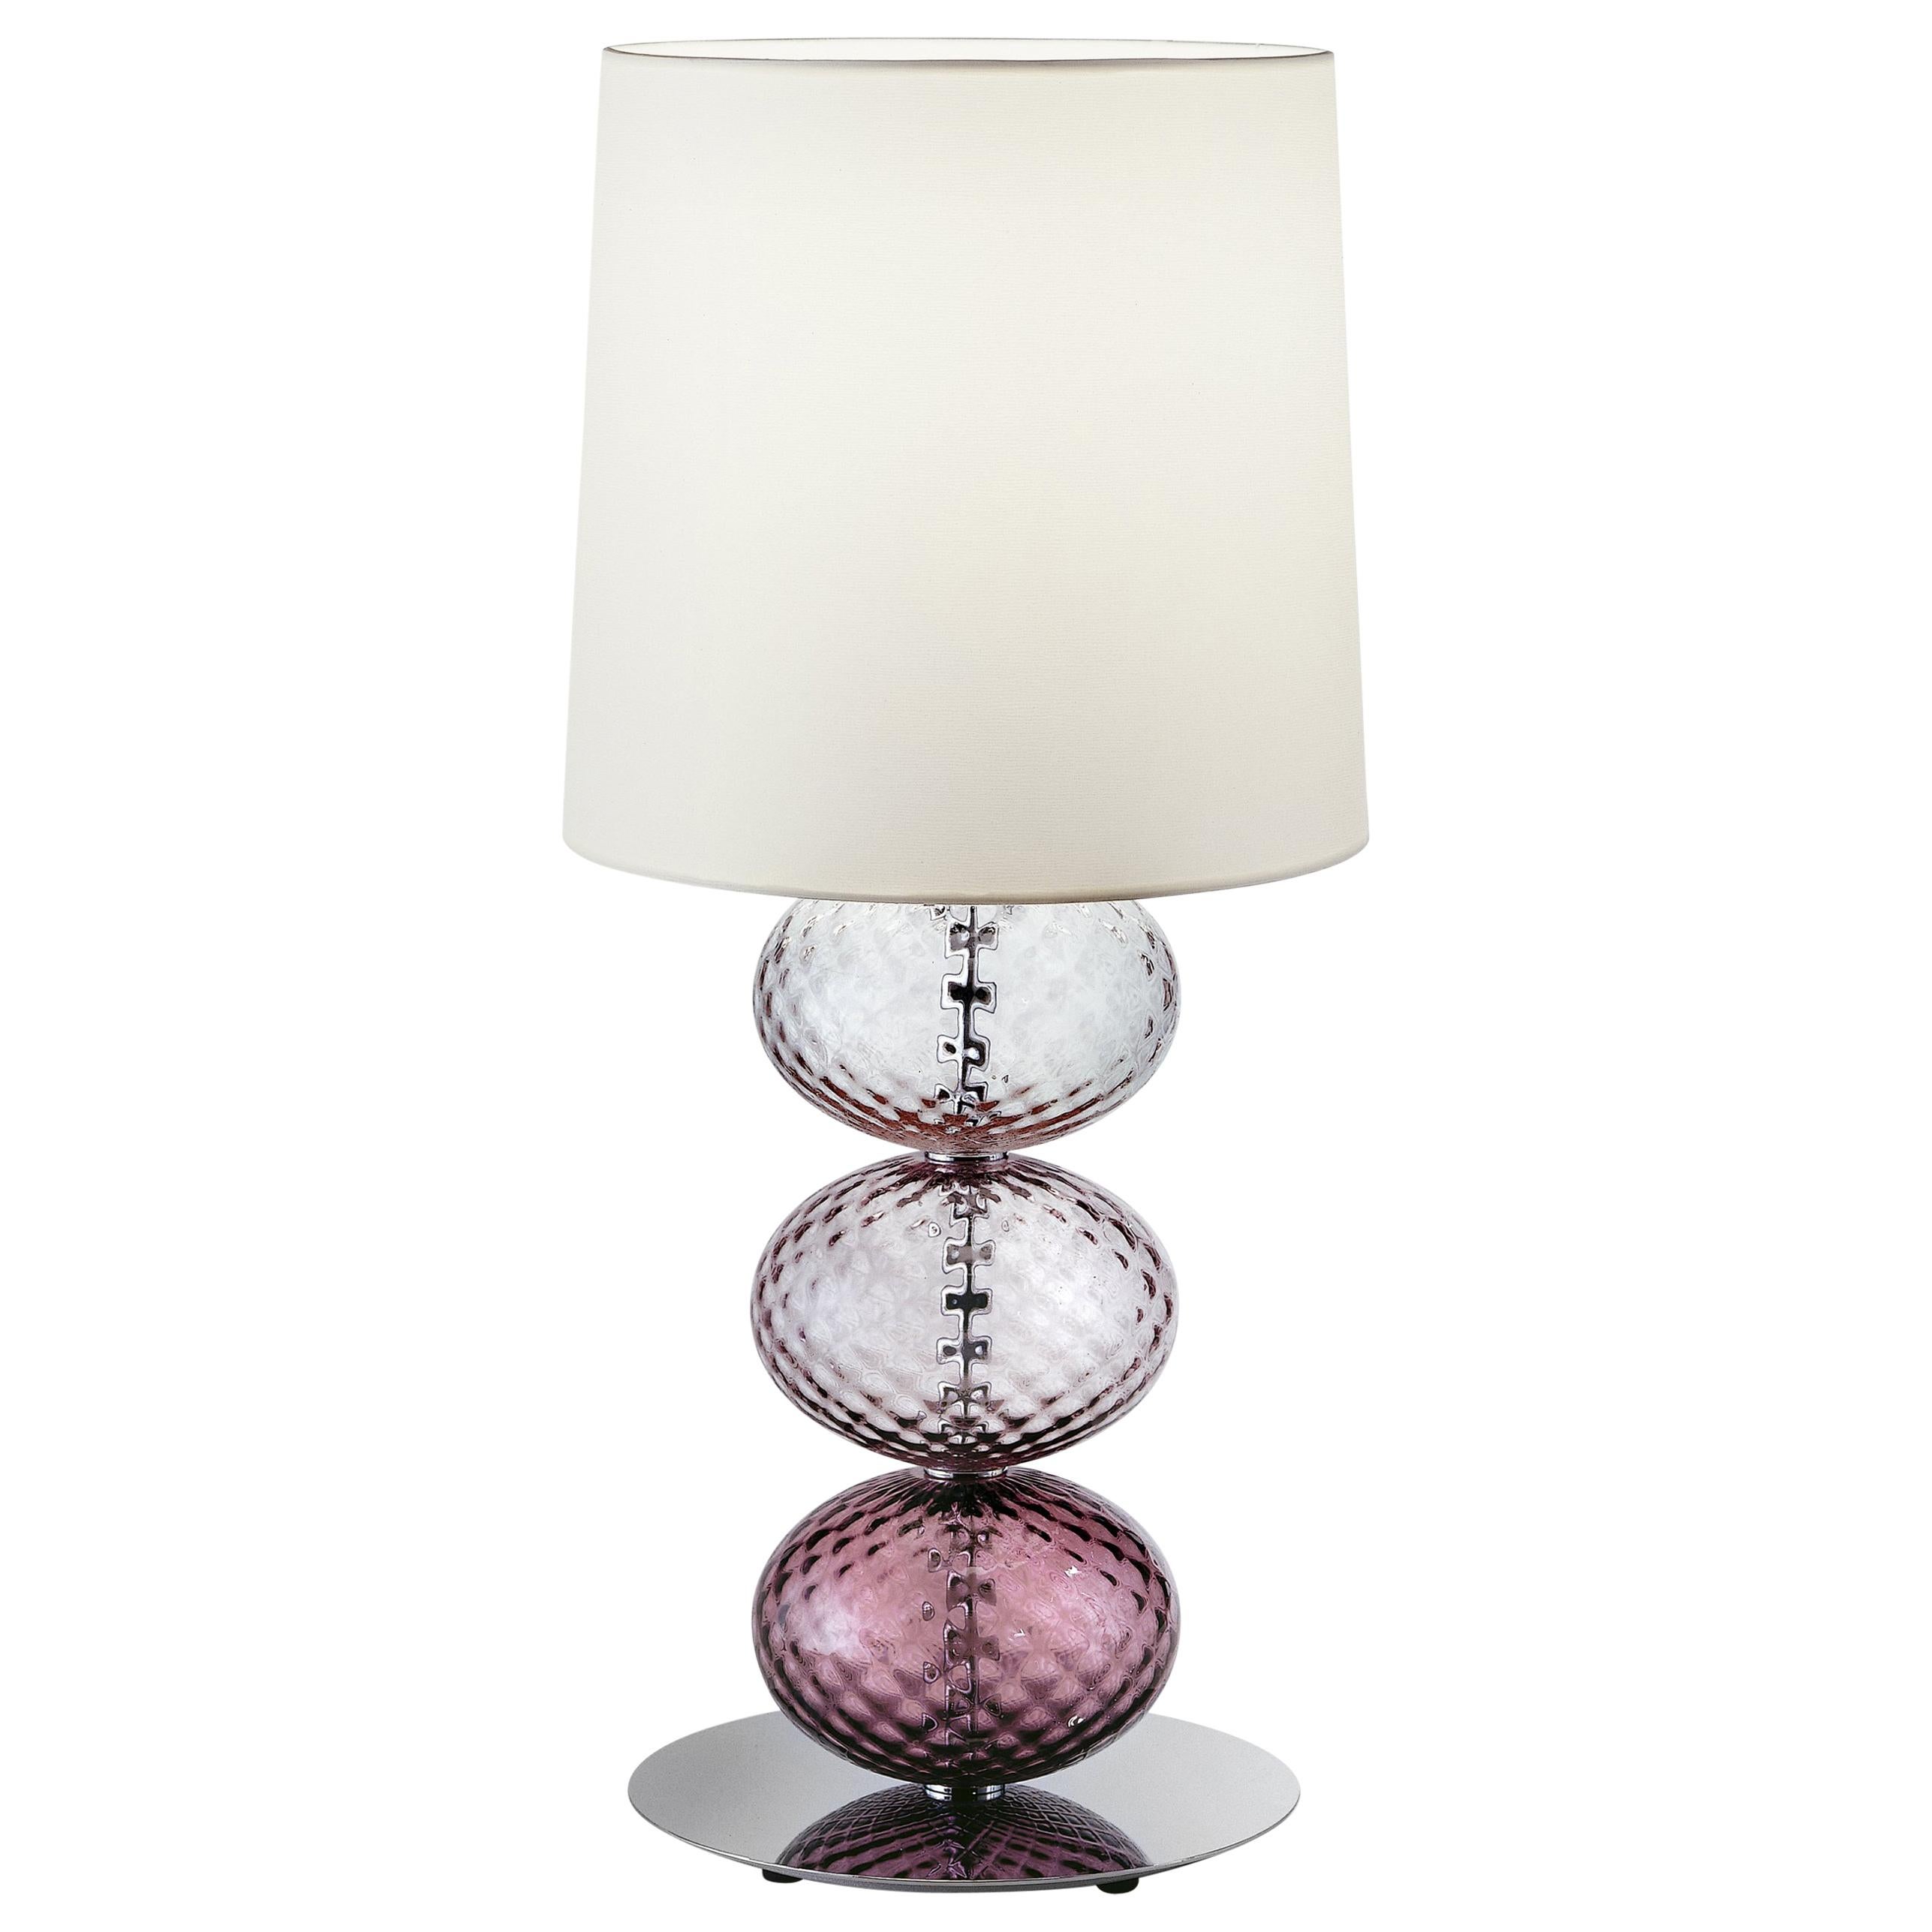 Abat Jour Table Lamp in Violet, Amethyst and Wisteria by Venini For Sale